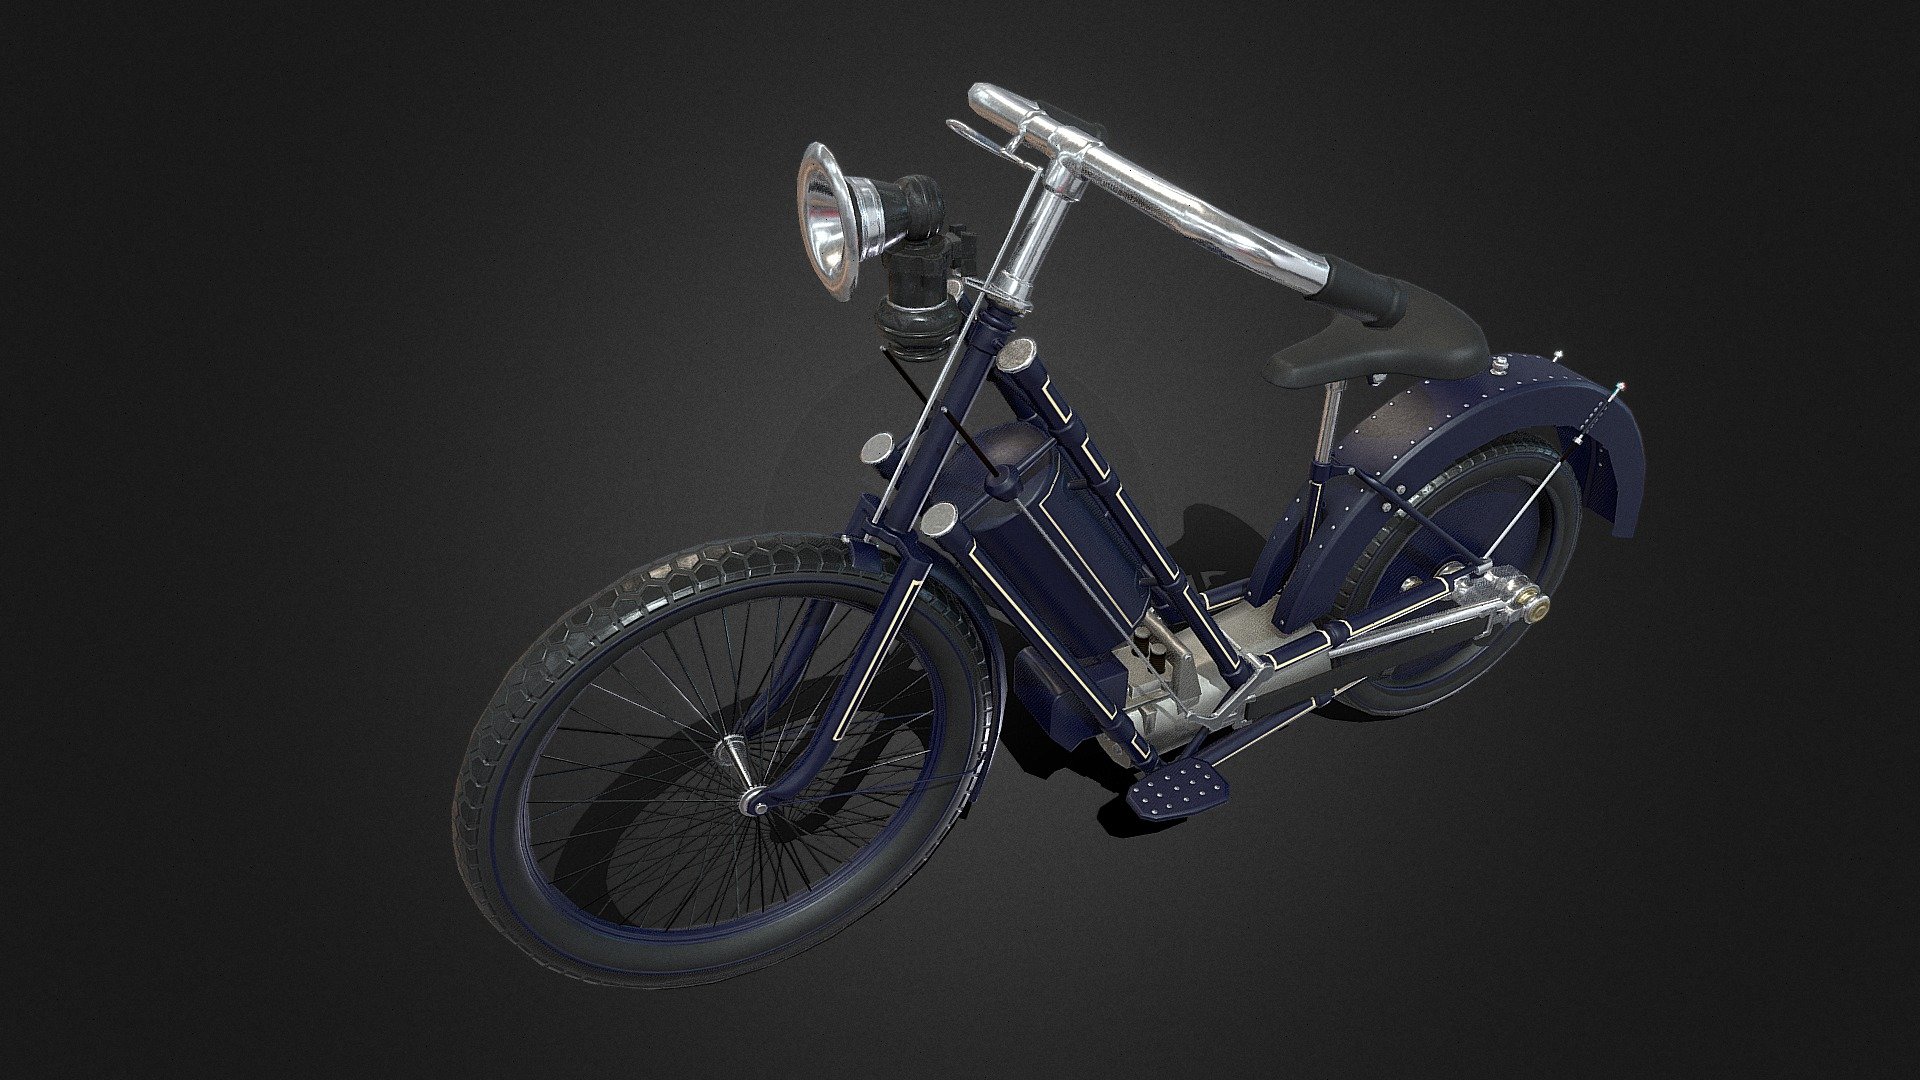 Antique Hildebrand &amp; Wolfmüller Bike - Low Poly - the world's first production motorcycle.

This is a High Quality asset using PBR materials.

Formats included are .blend, .obj, .fbx.

This asset uses PBR Metallic - Roughness workflow.

Mirrored UVs are used to increase texture resolution.

Technical details: All textures use the lossless .png and .tga file formats to keep quality and reduce file size.

Baked Textures include - Ambient Occlusion, ID map, Curvature.

Texture resolution - 2048: - Antique Hildebrand & Wolfmüller Bike - Low Poly - Buy Royalty Free 3D model by svg3d 3d model